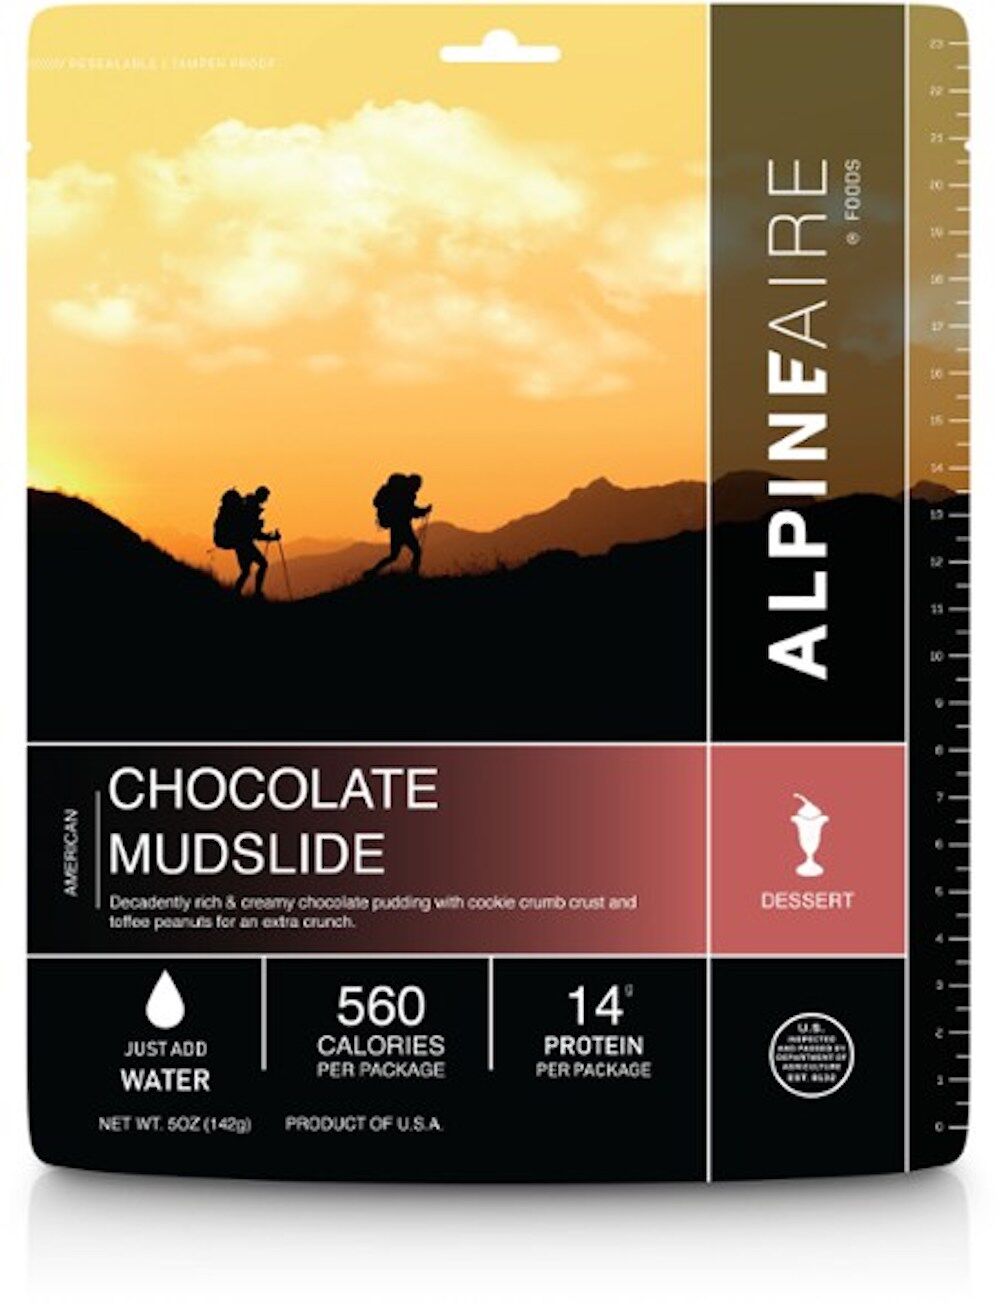 Packaging for AlpineAire chocolate mudslide depicts two hikers at sunset